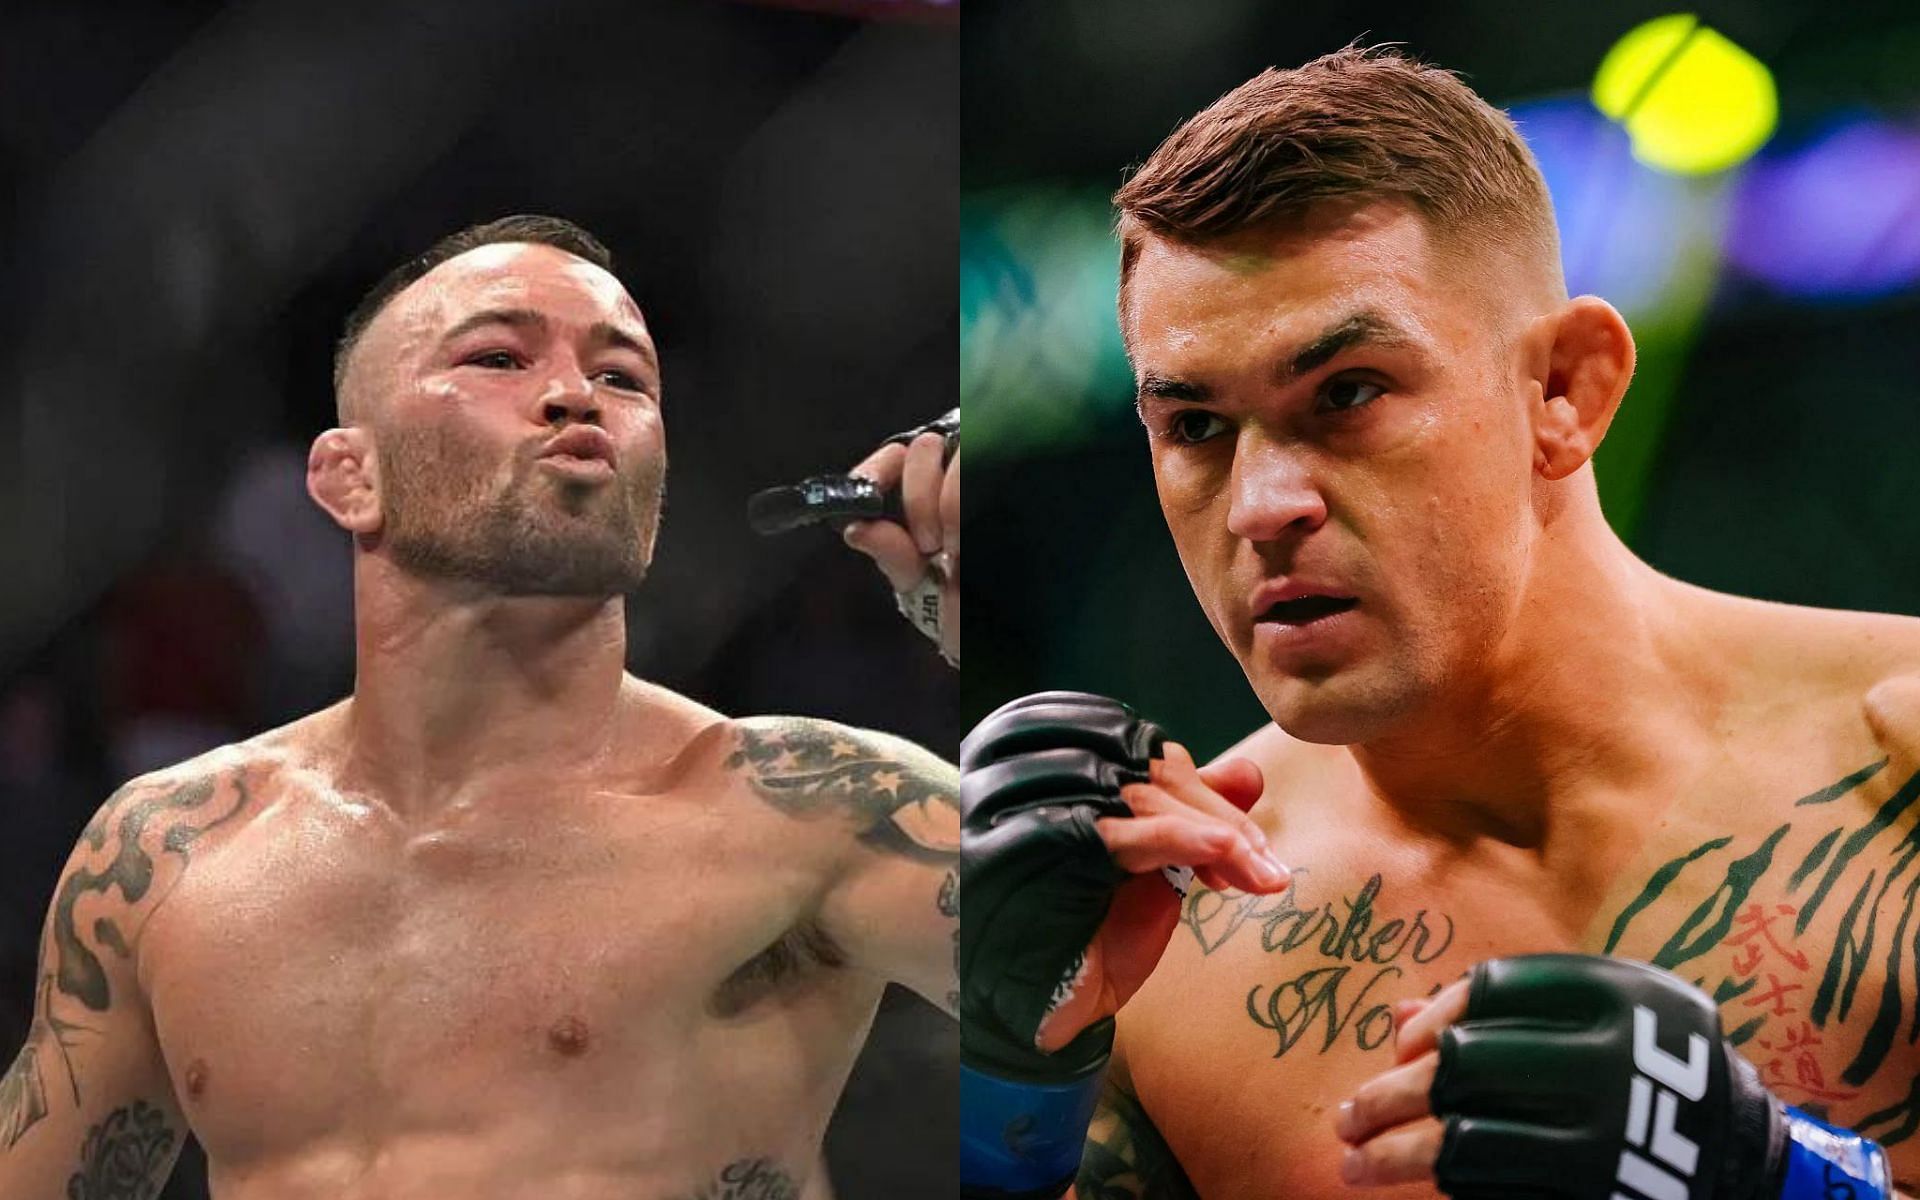 Dustin Poirier makes it clear “it’s still on sight” with Colby Covington despite turning down fight against him